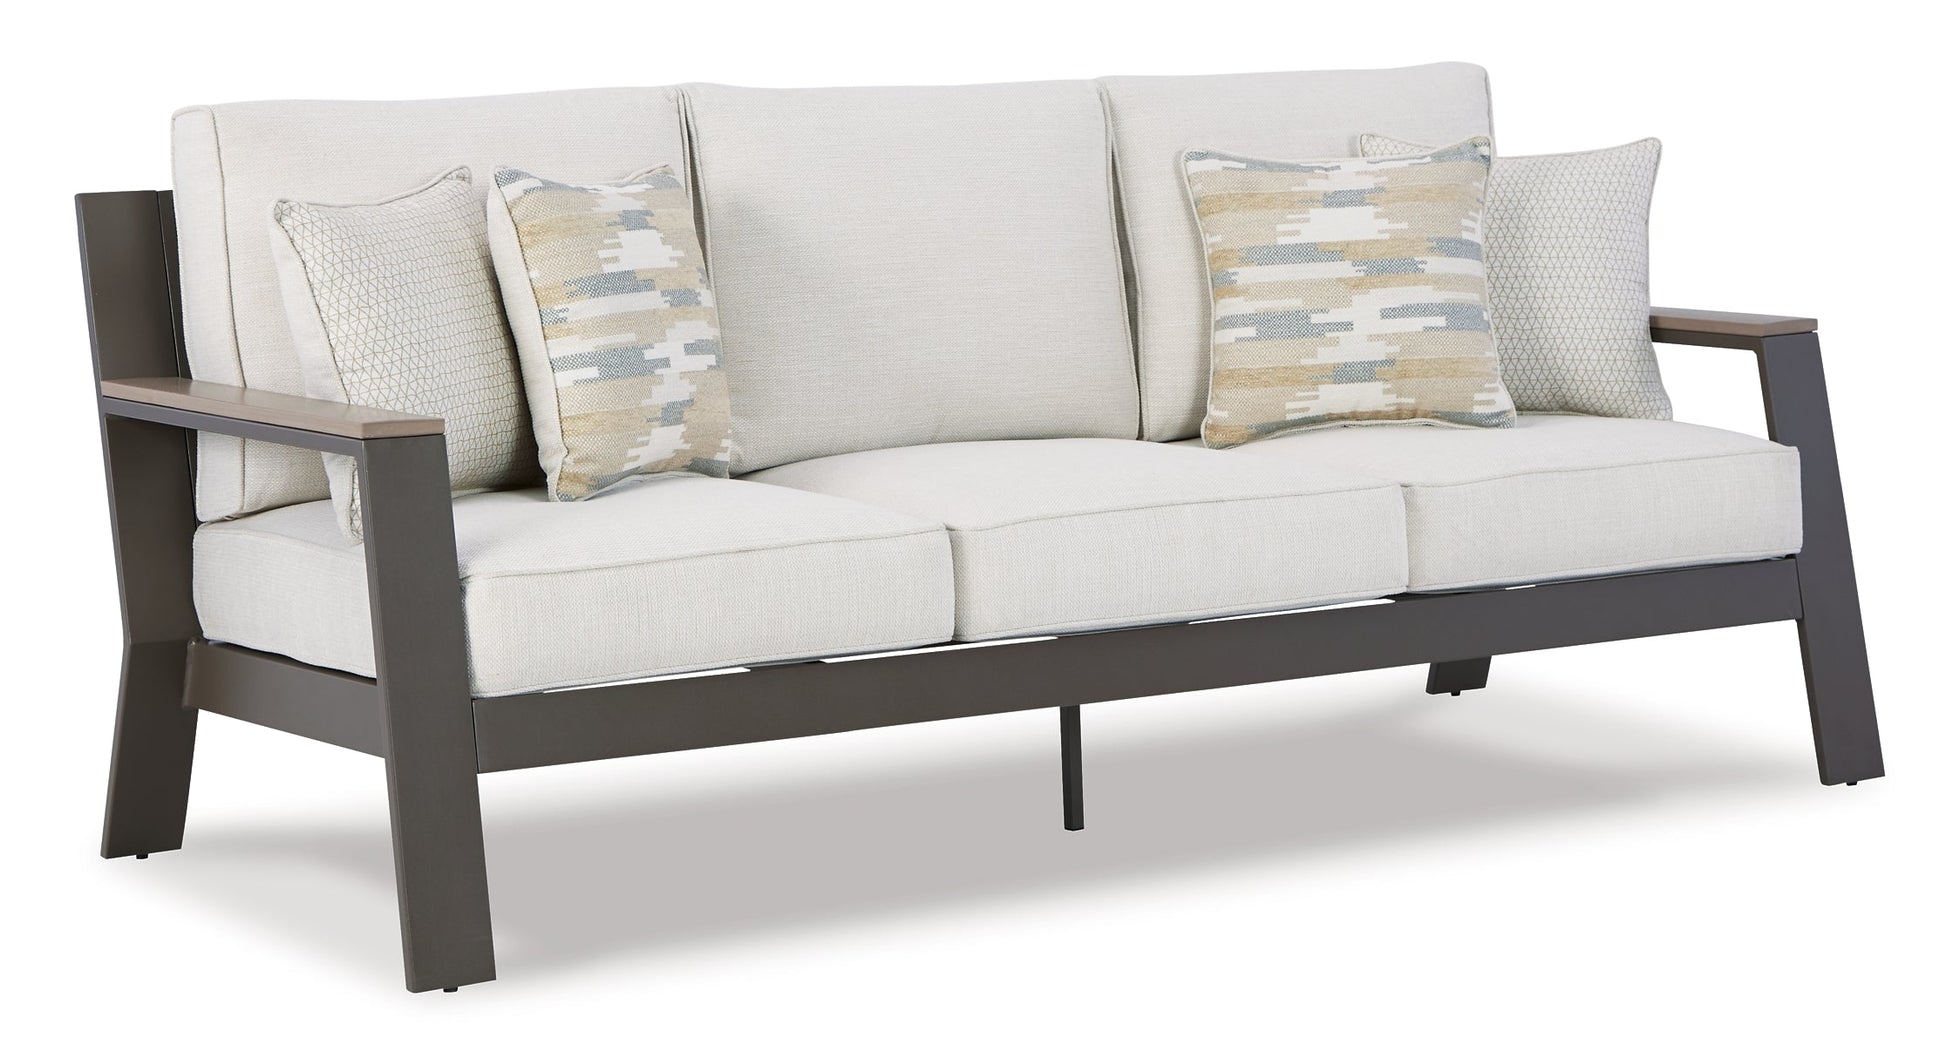 Tropicava Outdoor Sofa and Loveseat at Walker Mattress and Furniture Locations in Cedar Park and Belton TX.